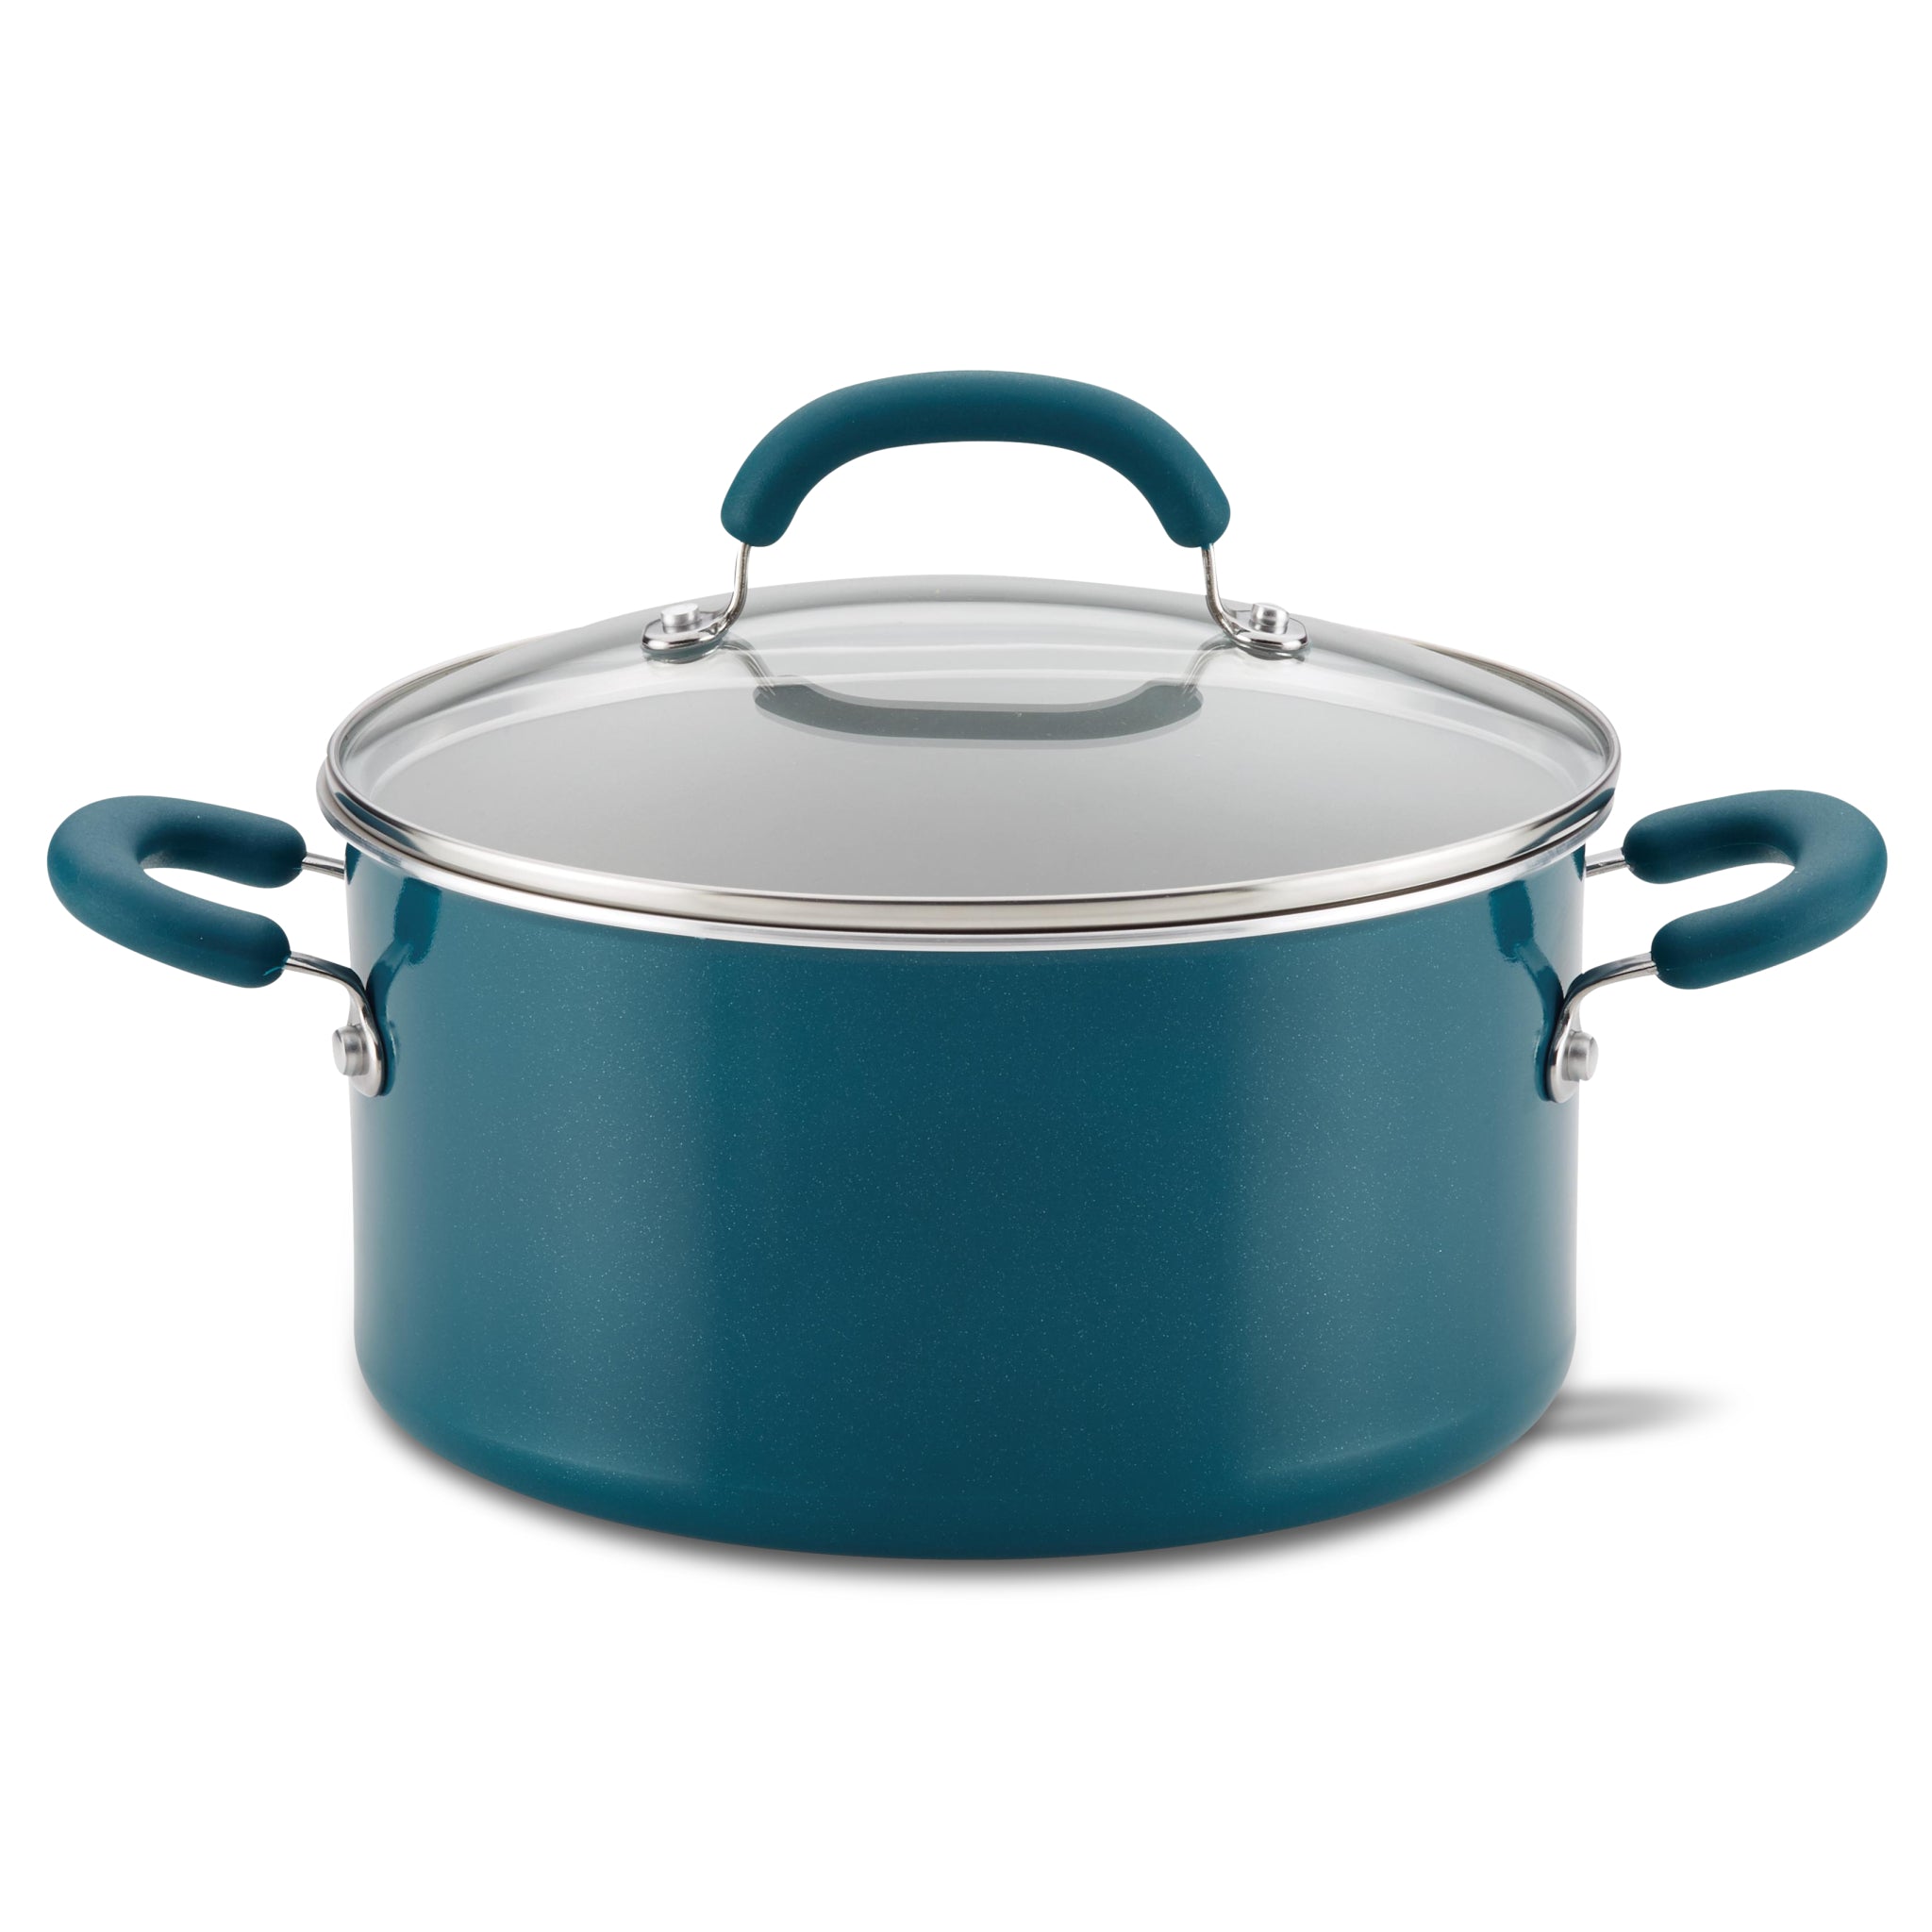 Rachael Ray Cook + Create 12qt Enamel on Steel Stockpot with Lid - Almond